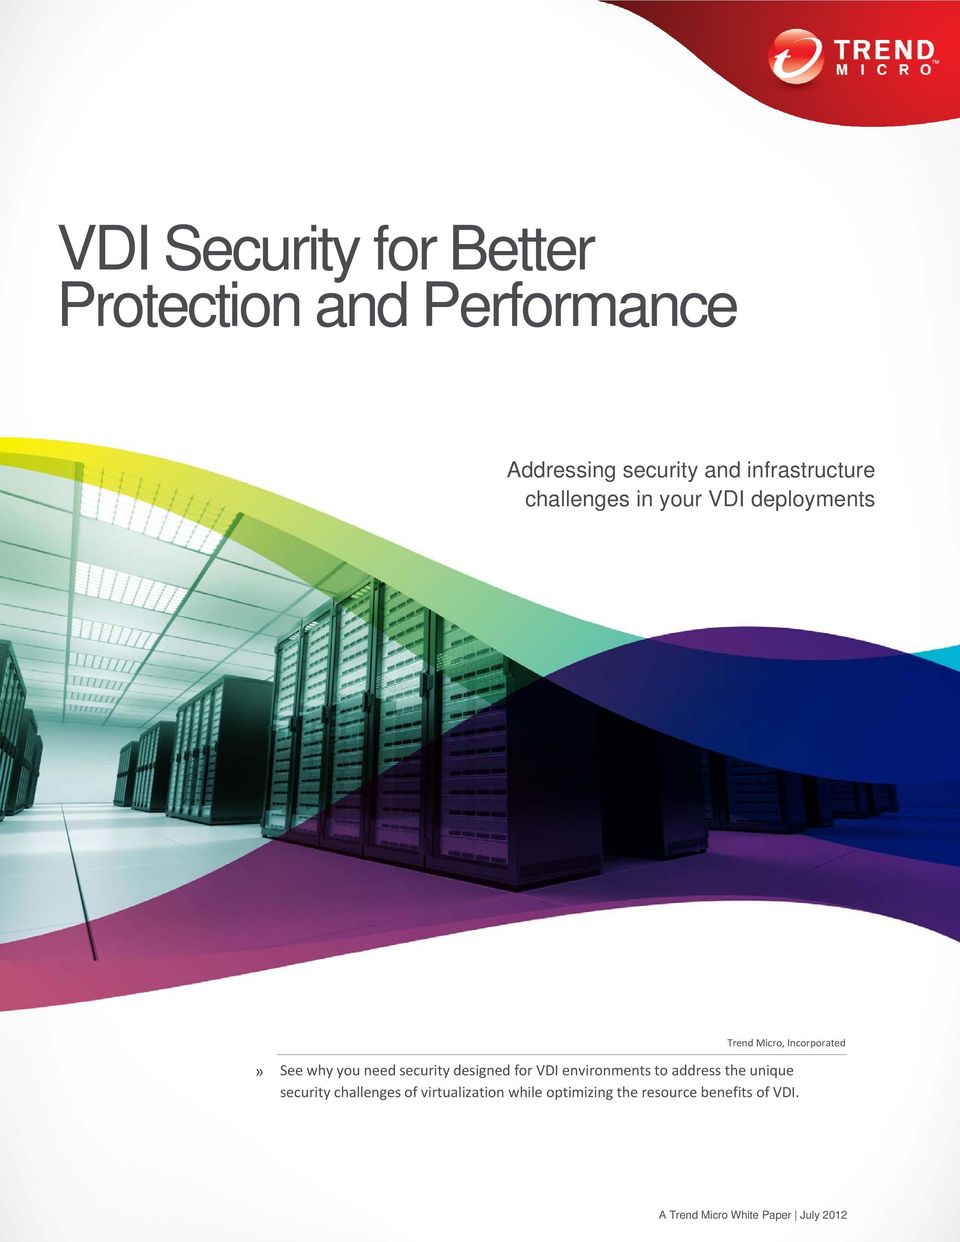 you need security designed for VDI environments to address the unique security